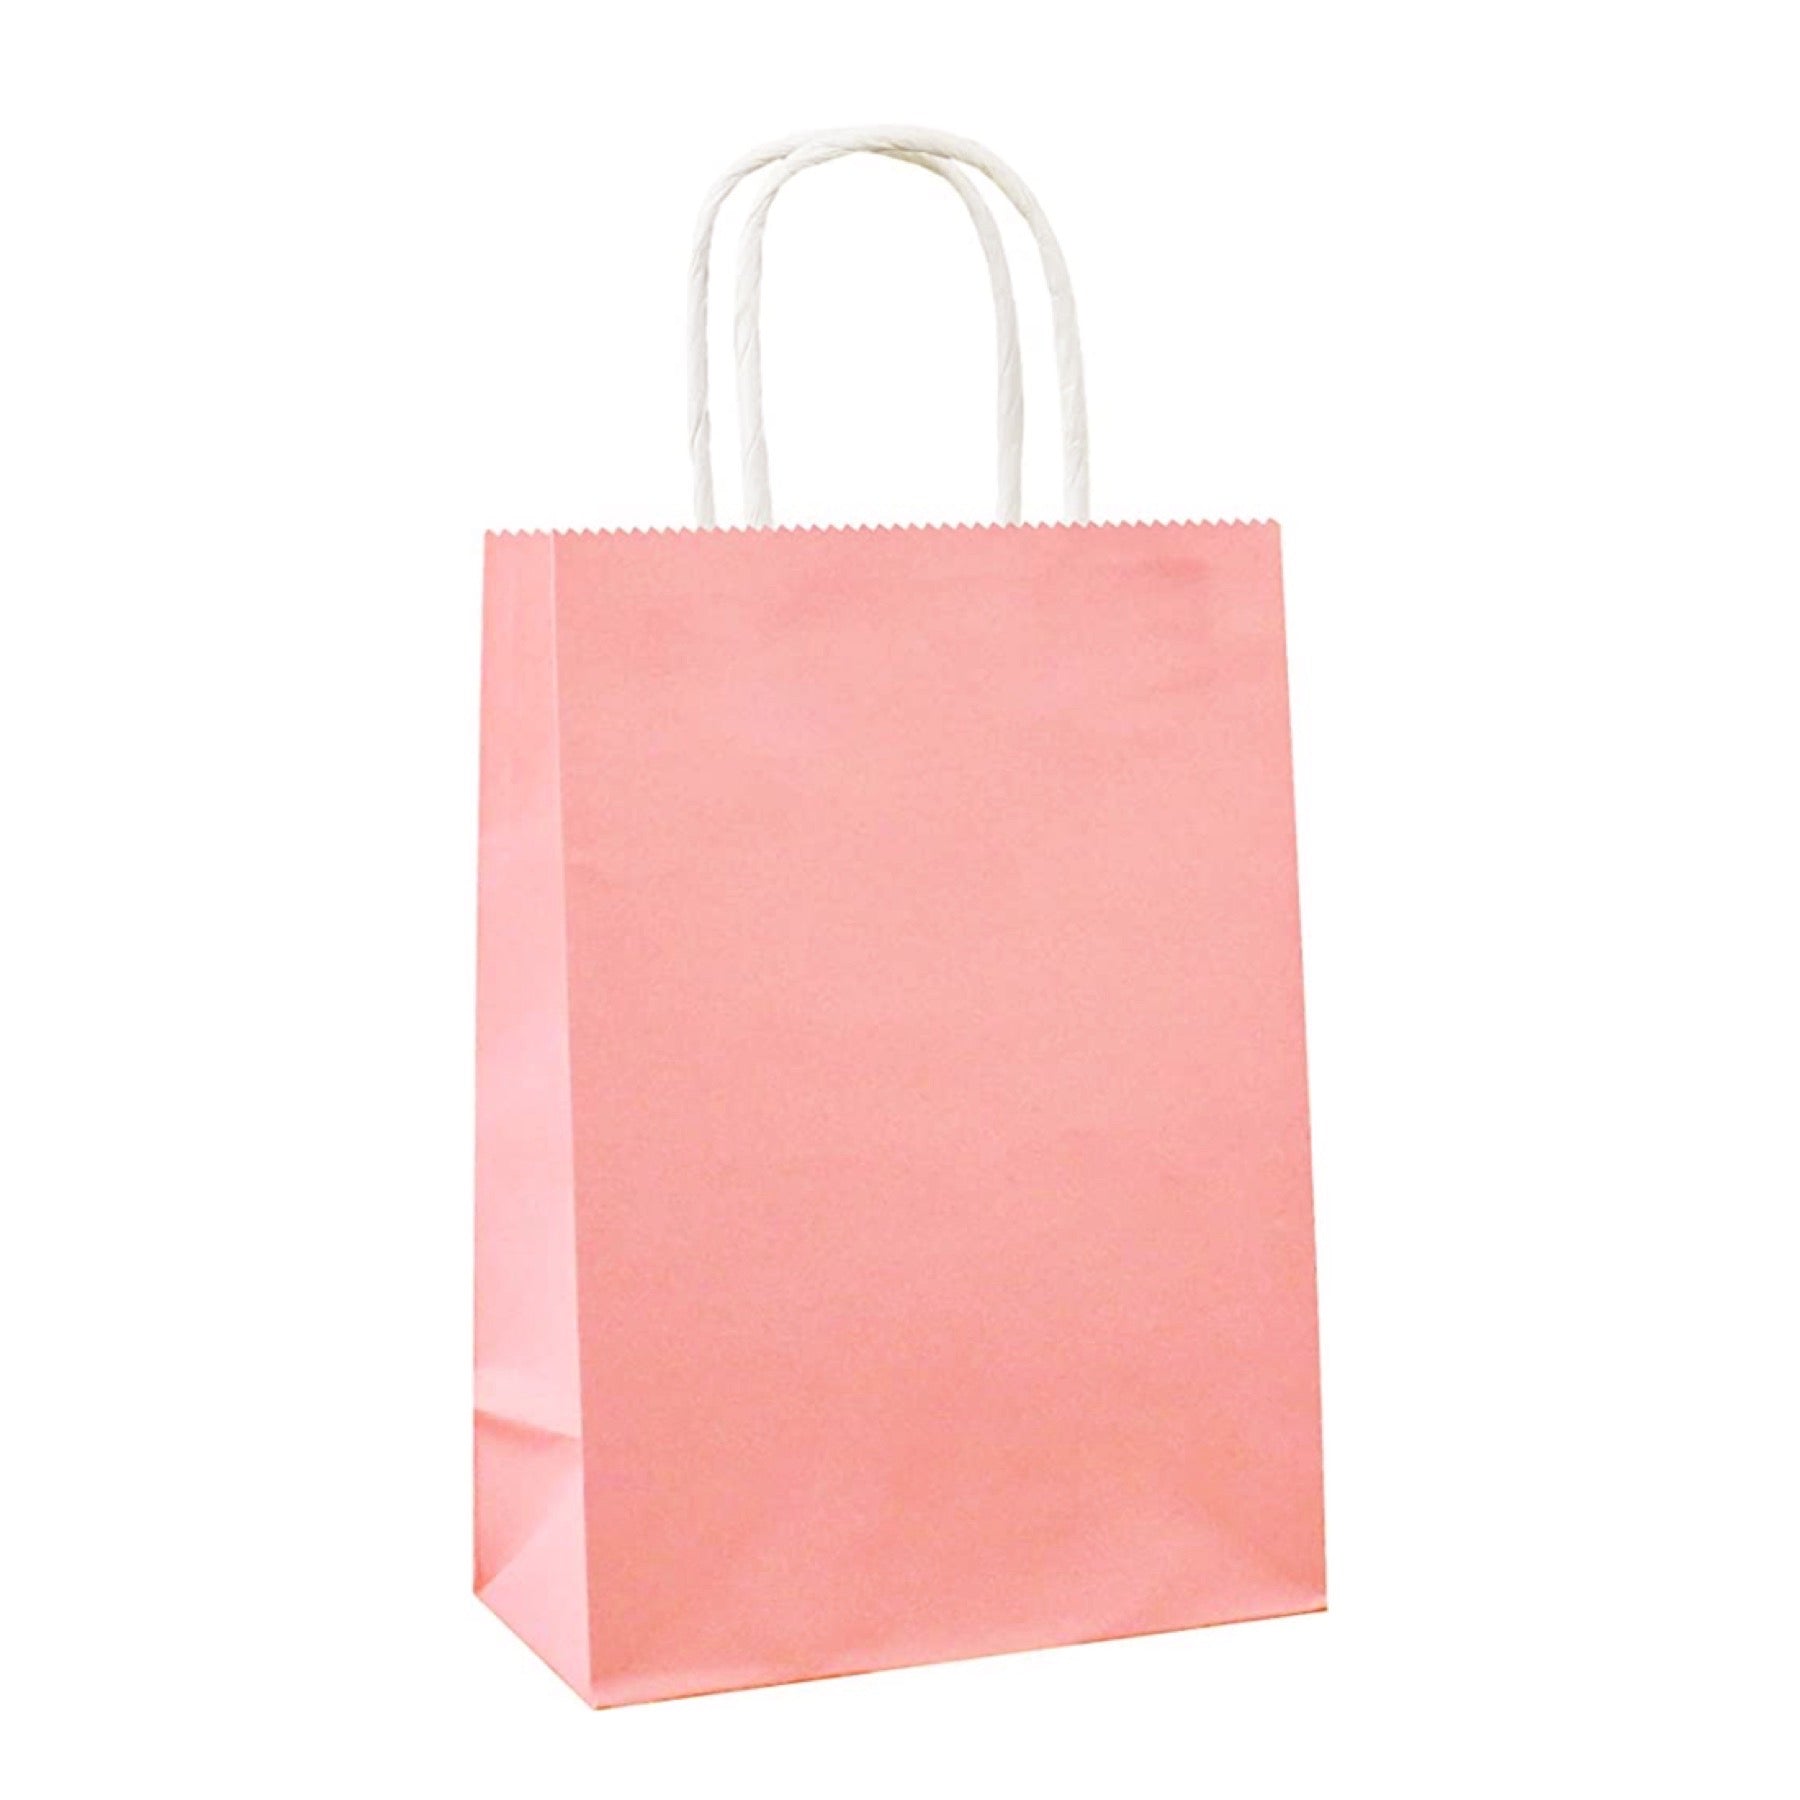 Share more than 155 blush pink gift bags super hot